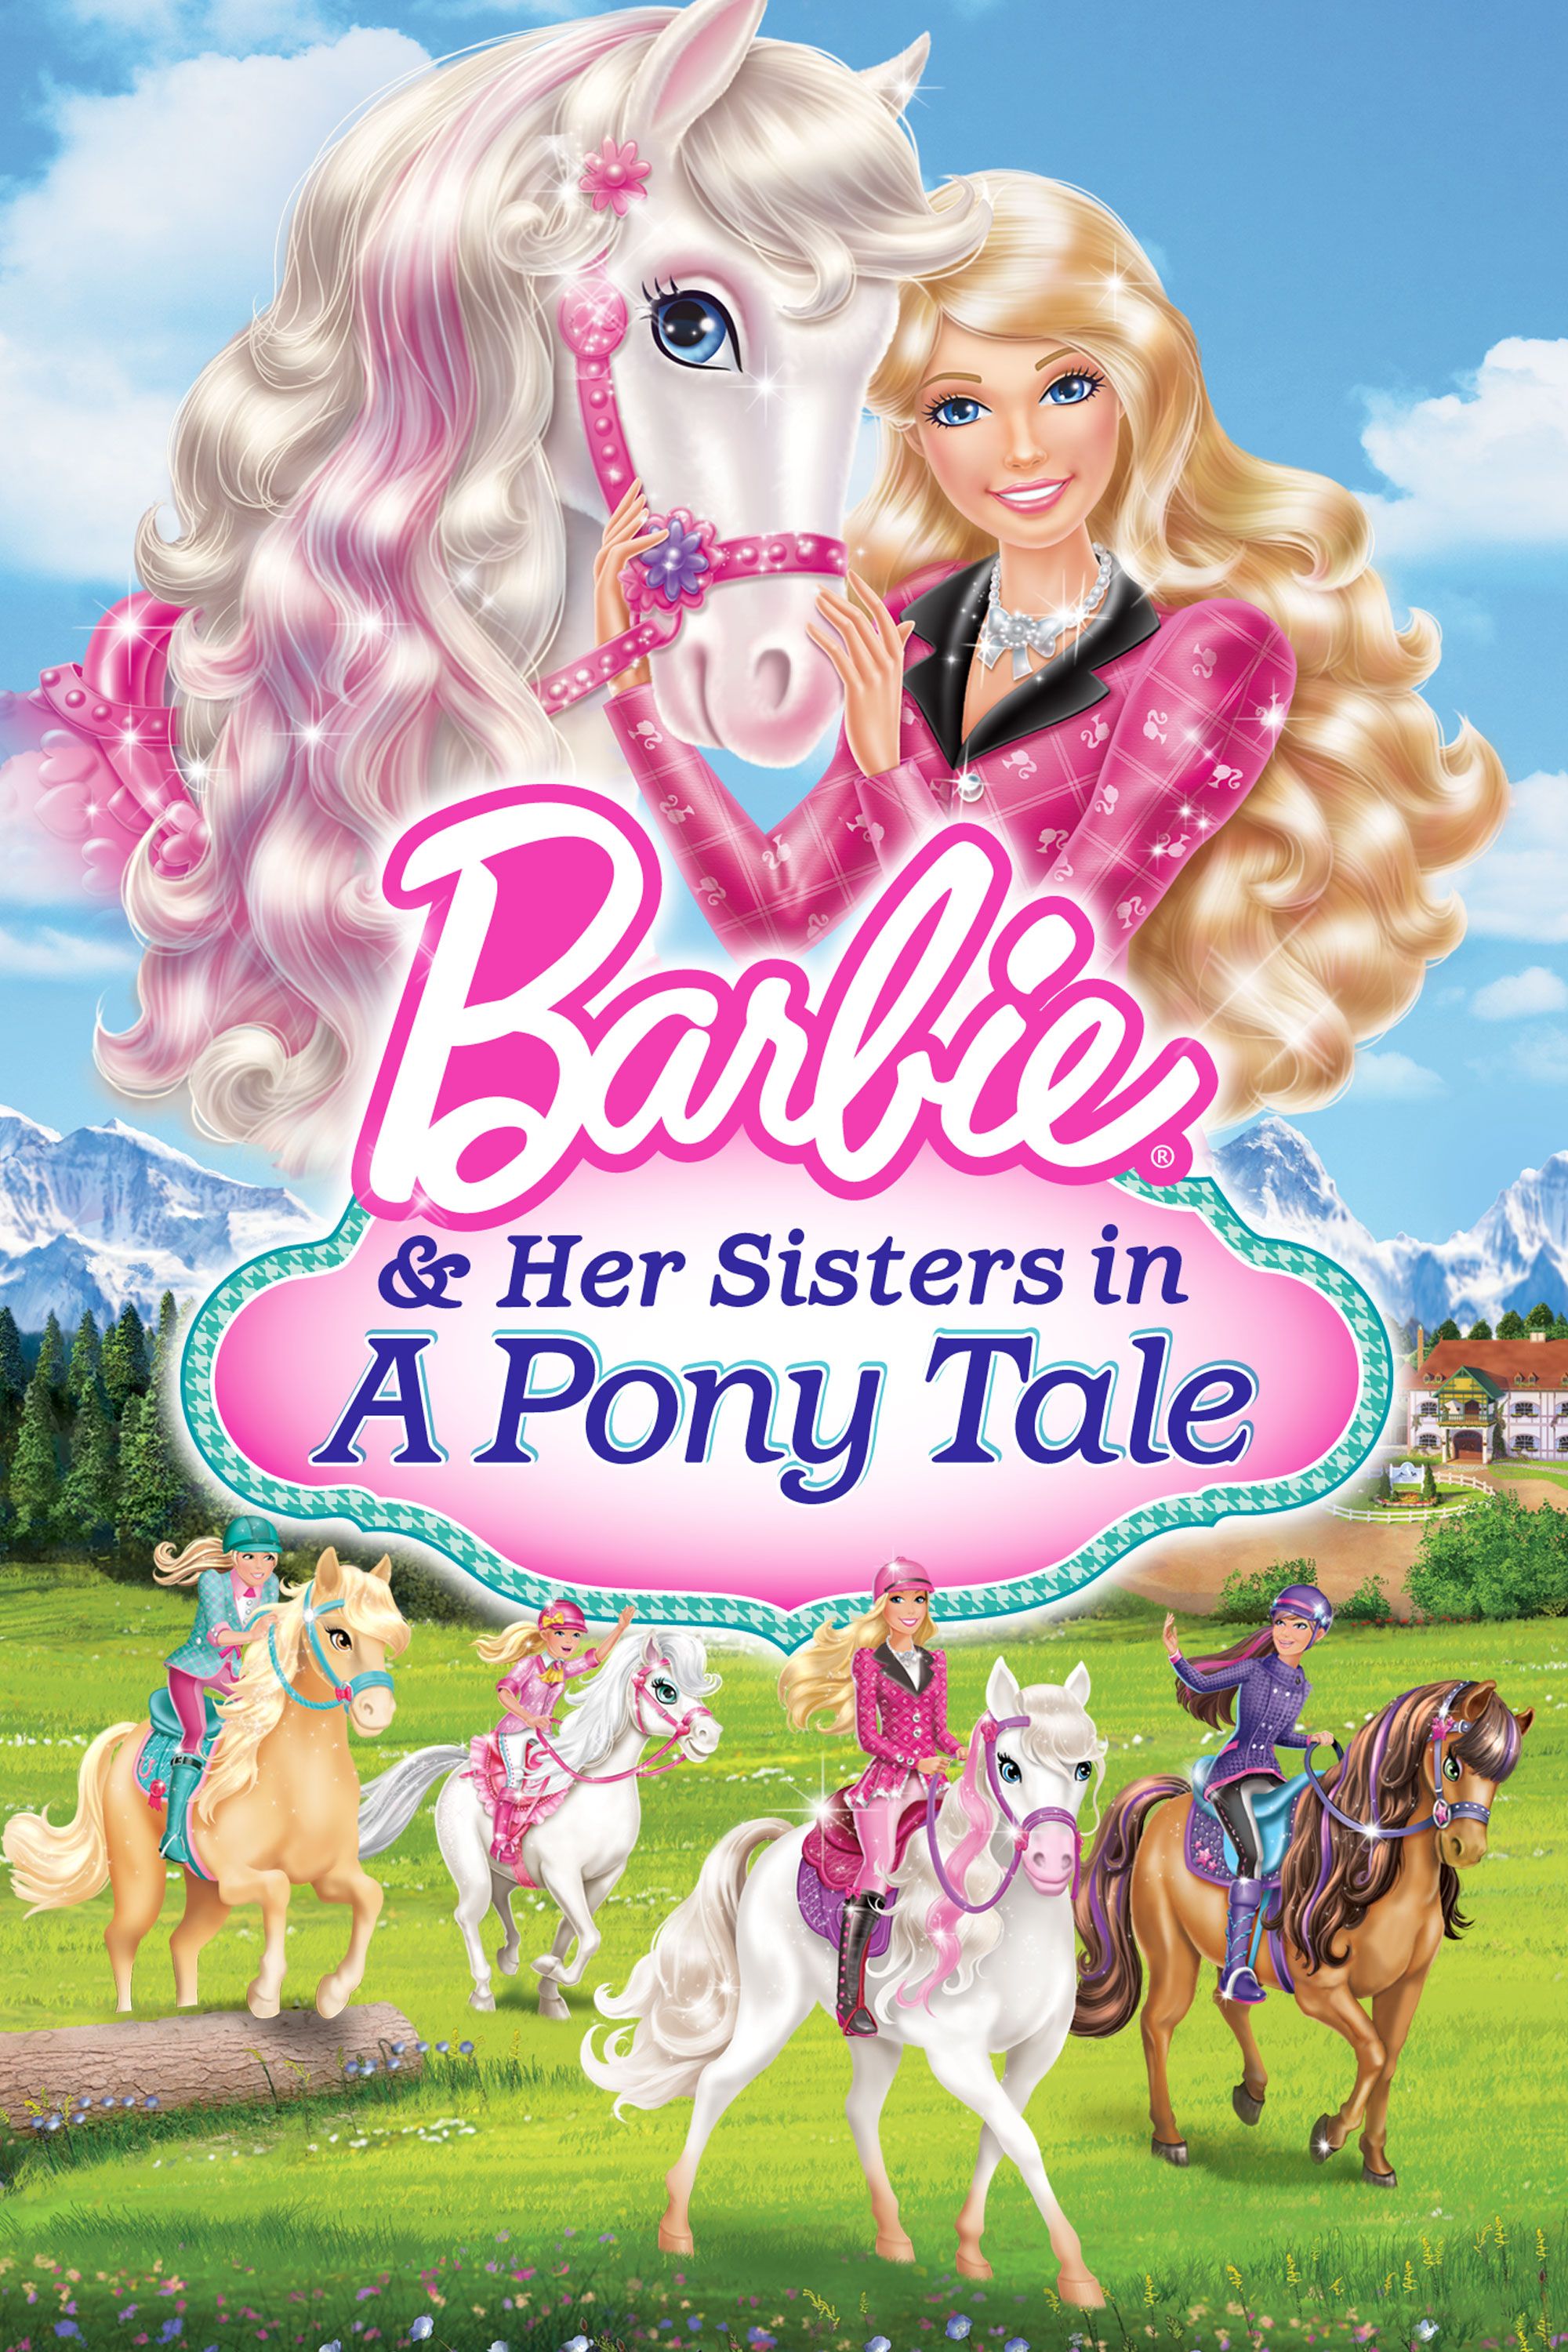 barbie and pony tale full movie